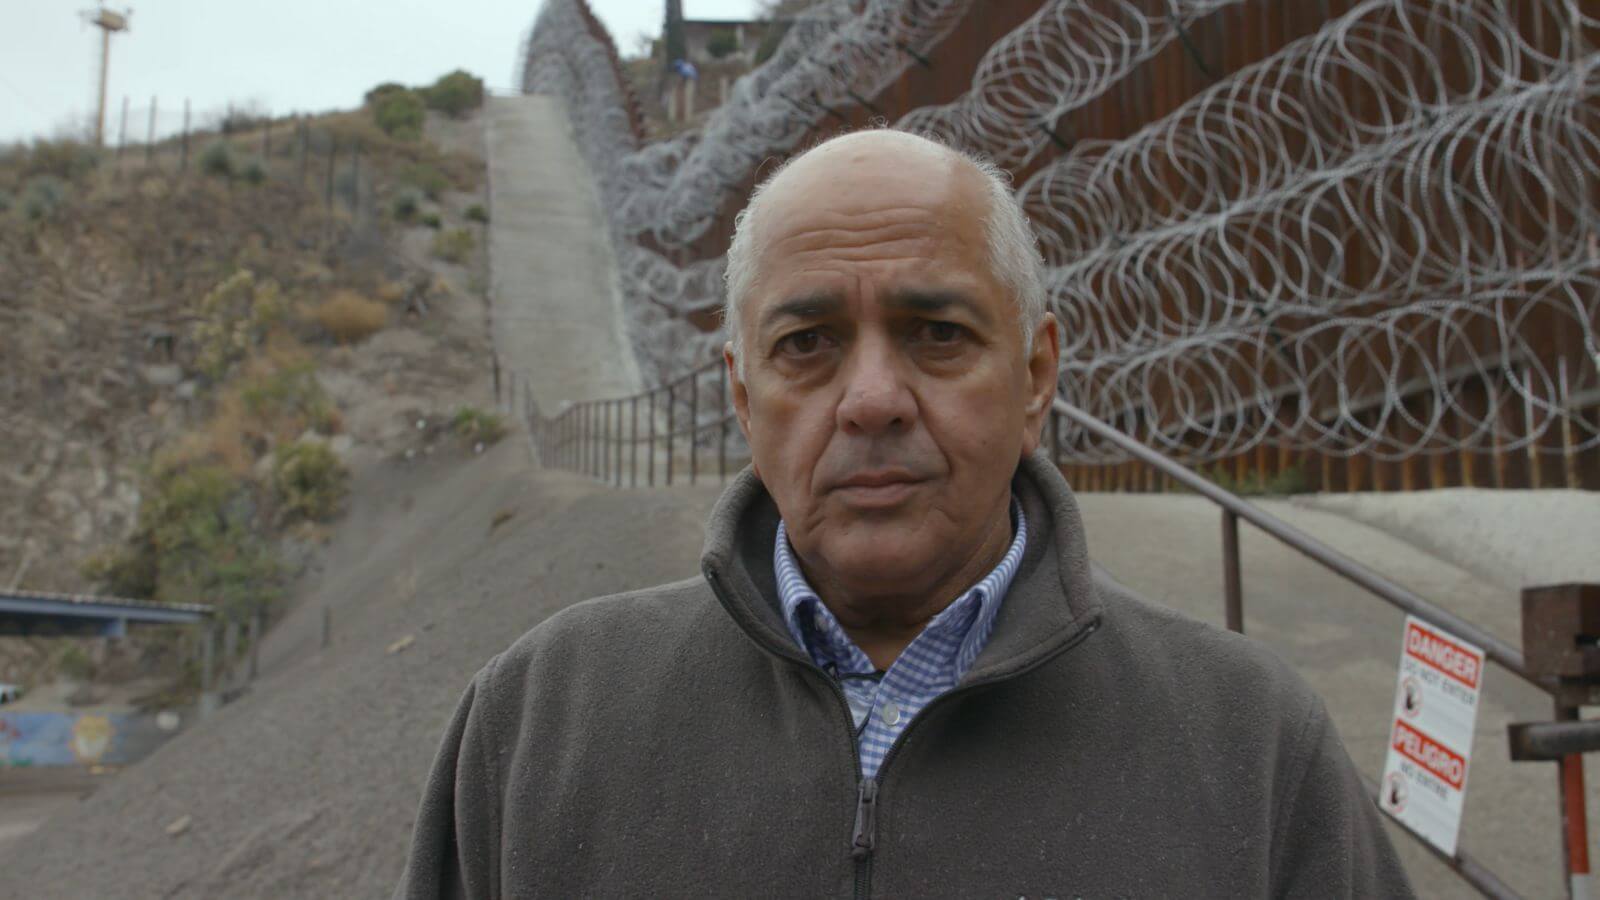 Older man standing in front of a large border fence with long, running loops of barbed wire